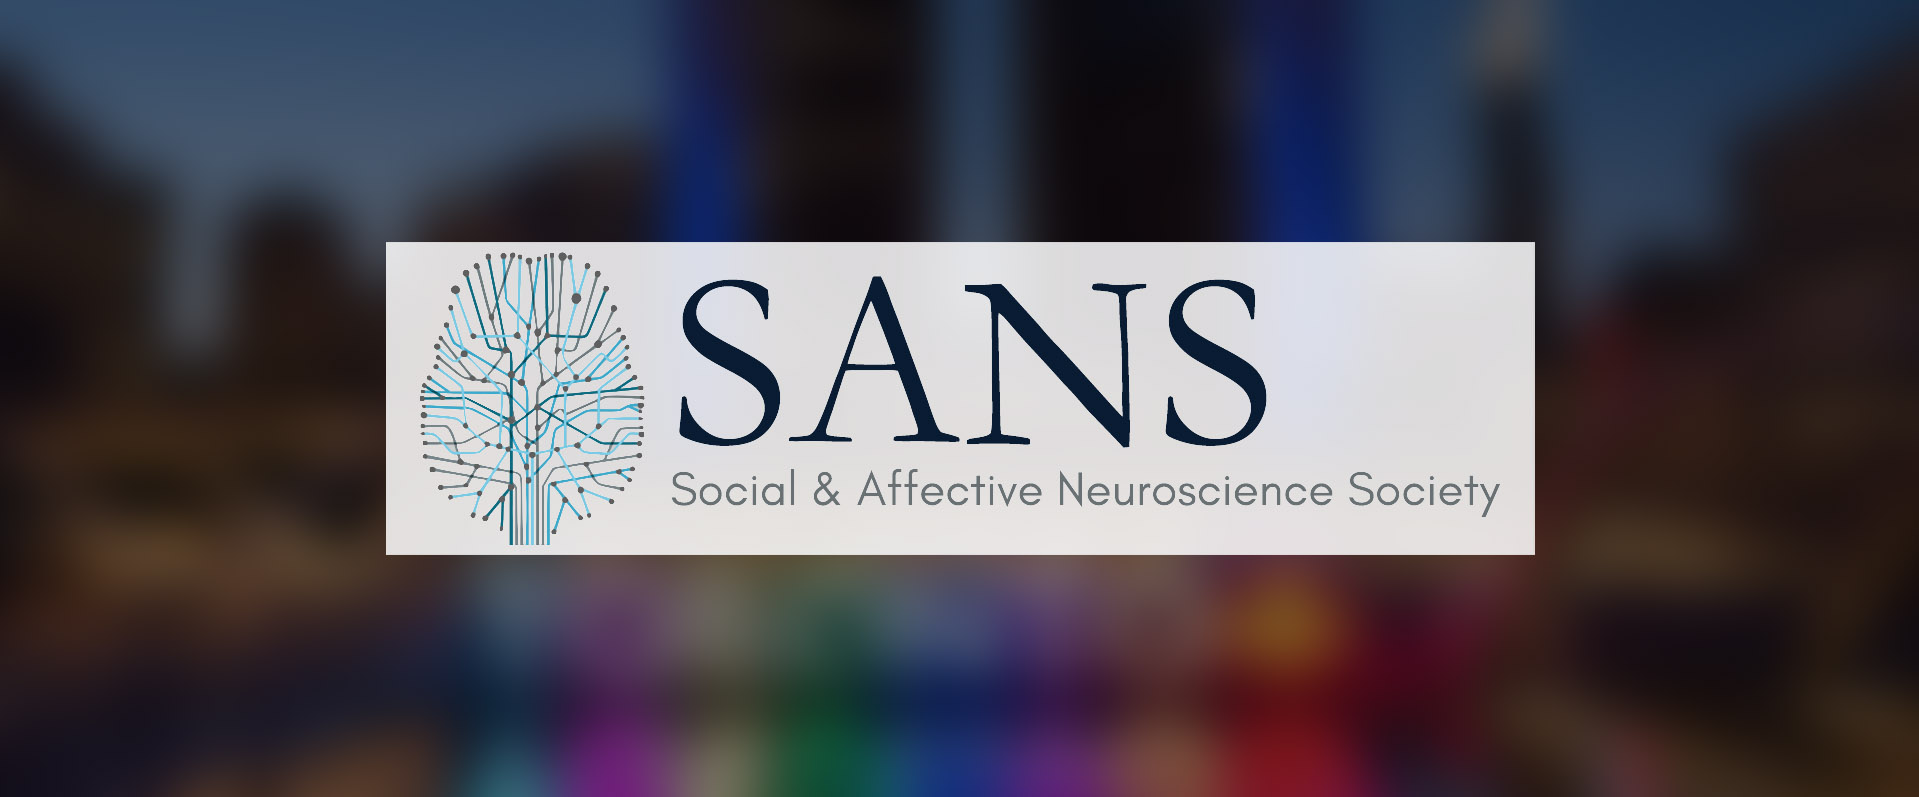 16th Annual Social and Affective Neuroscience Society Meeting